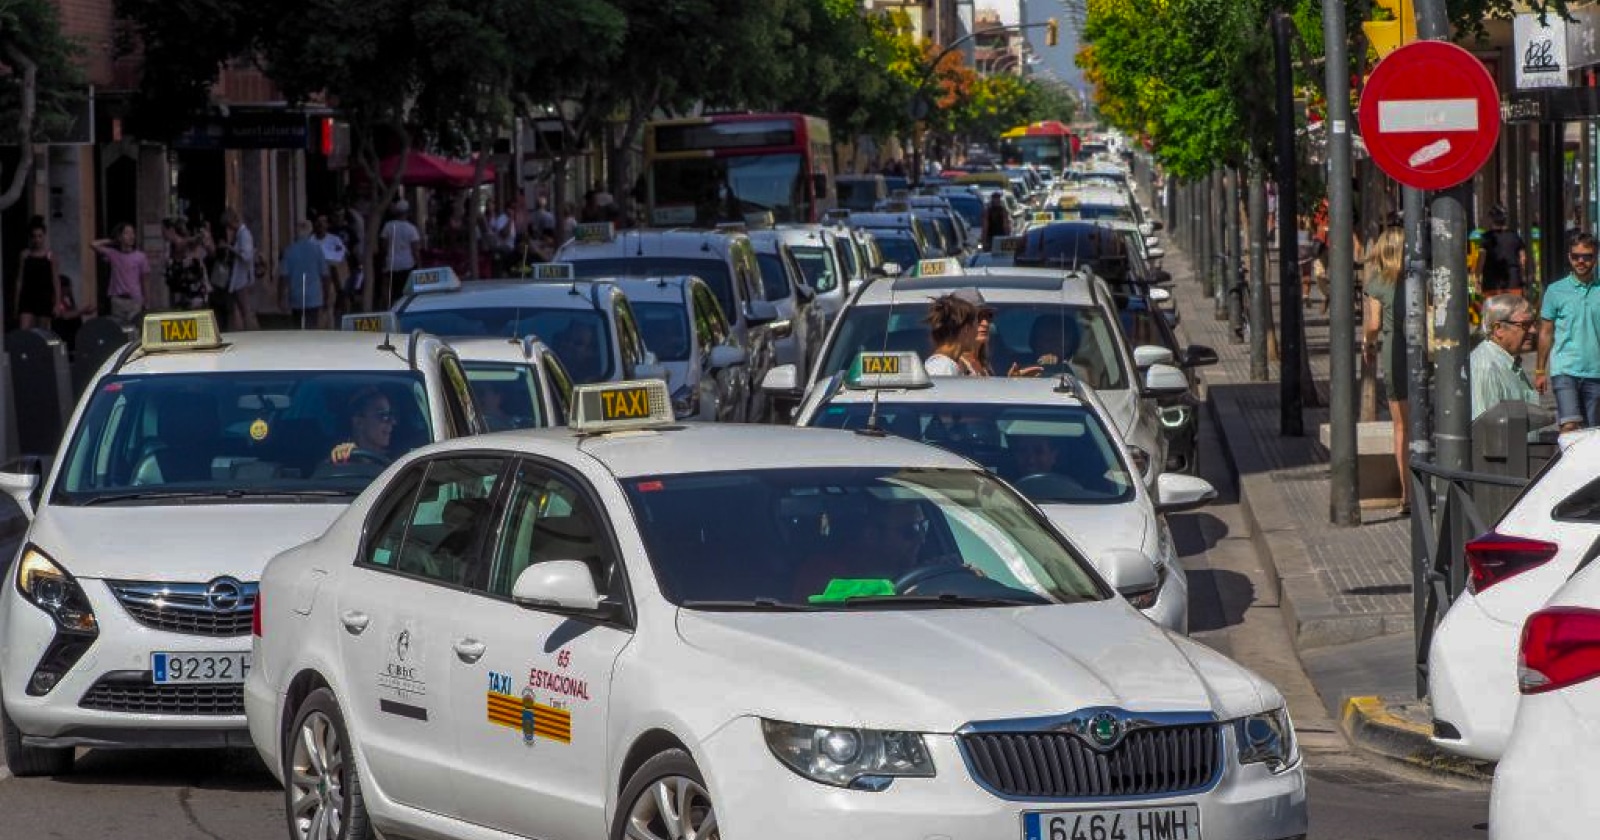 Uber in Ibiza? The Next Best Thing 12